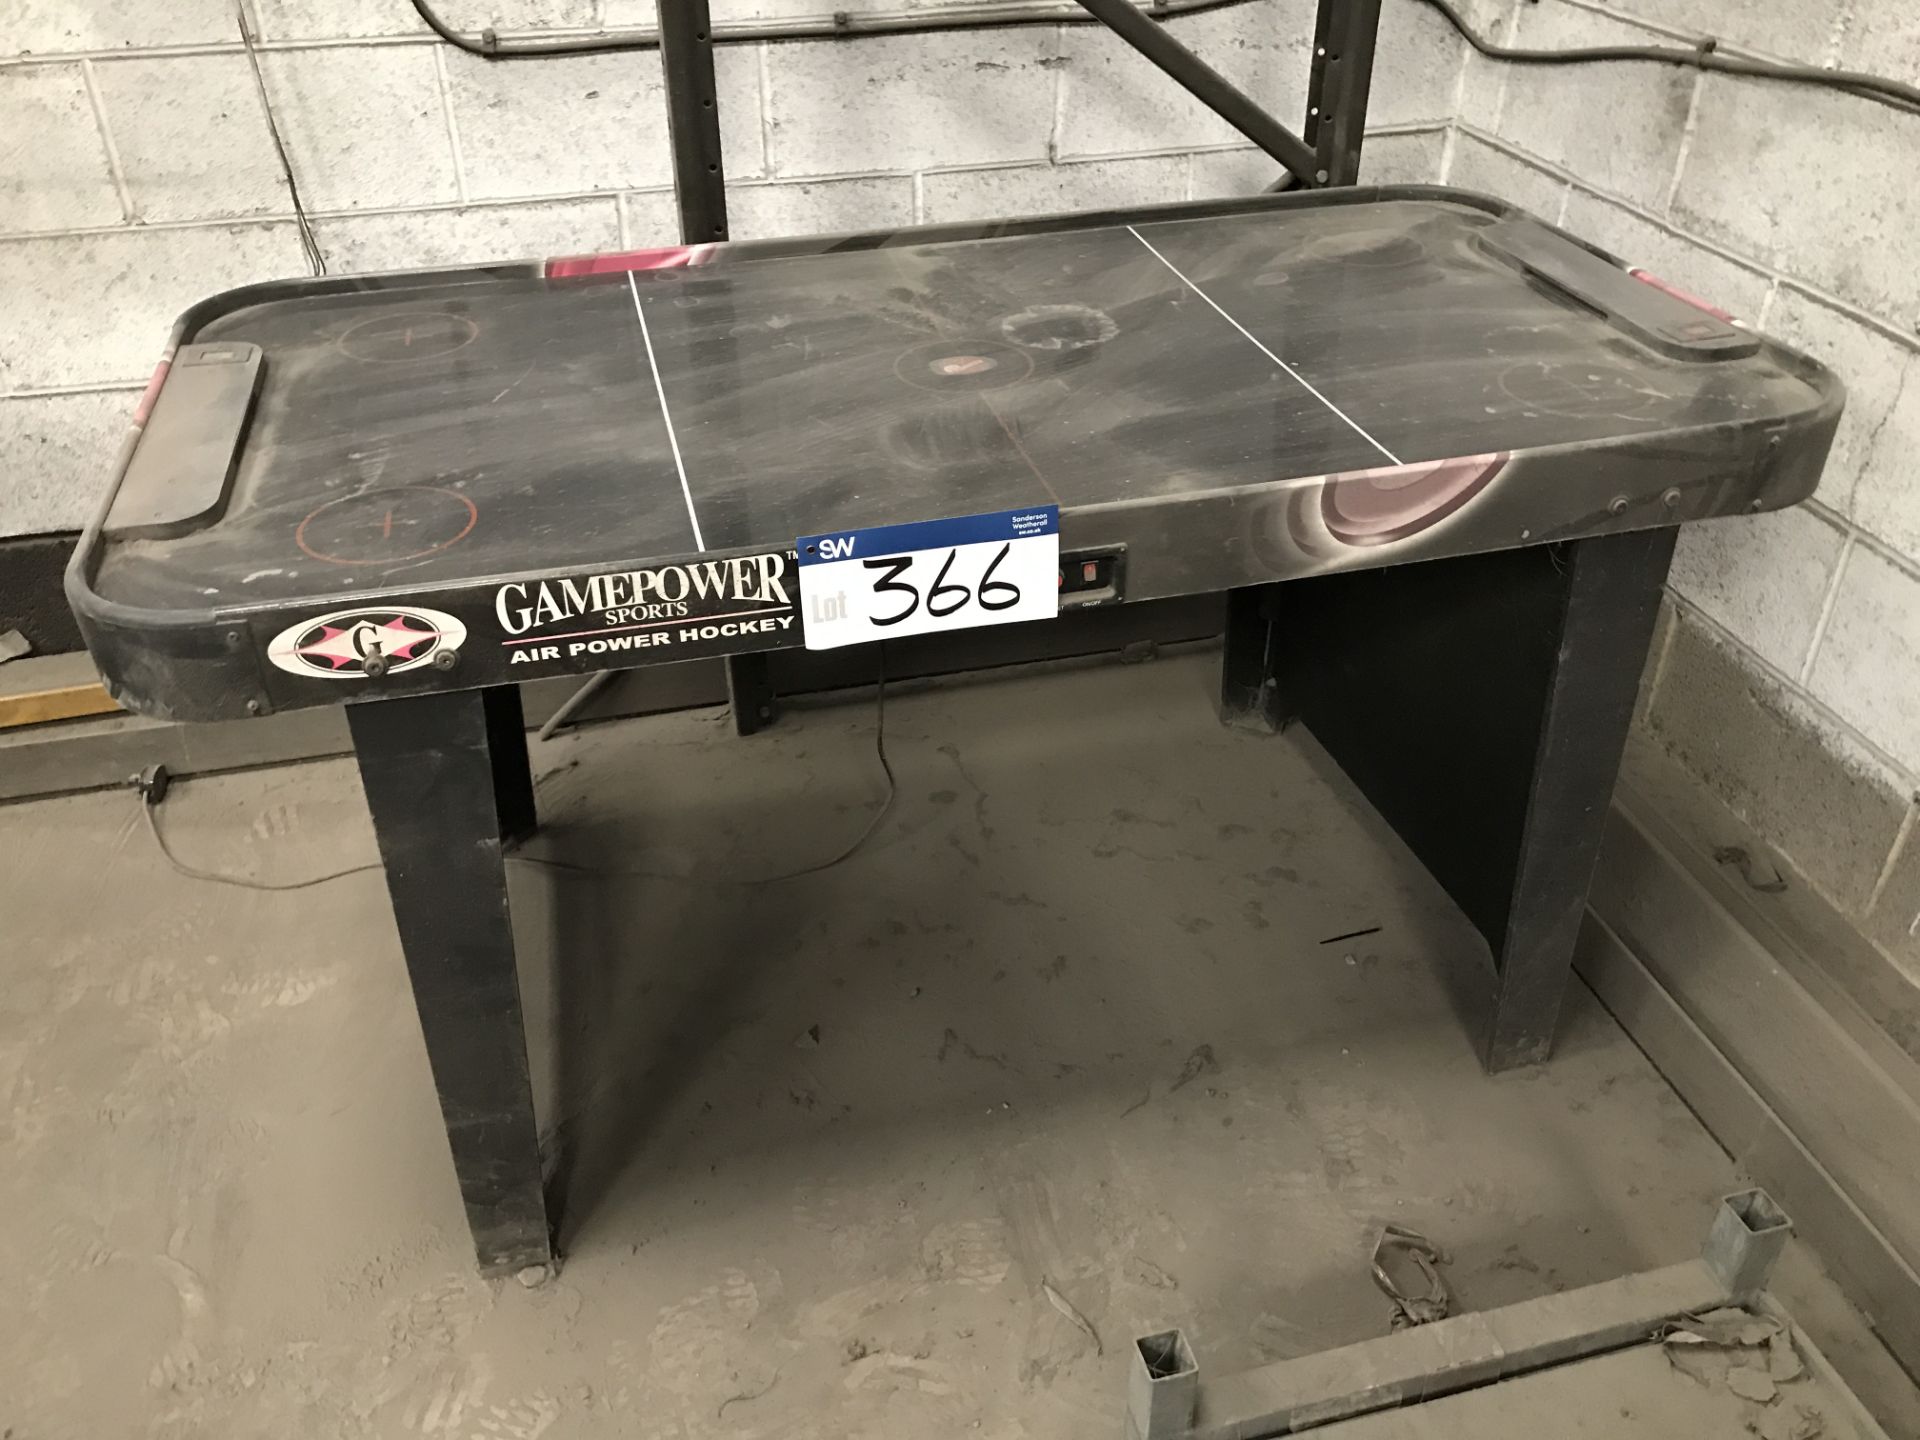 Gamepower Sports Air Power Hockey Table, 240V (lot located at Bedfords Limited (In